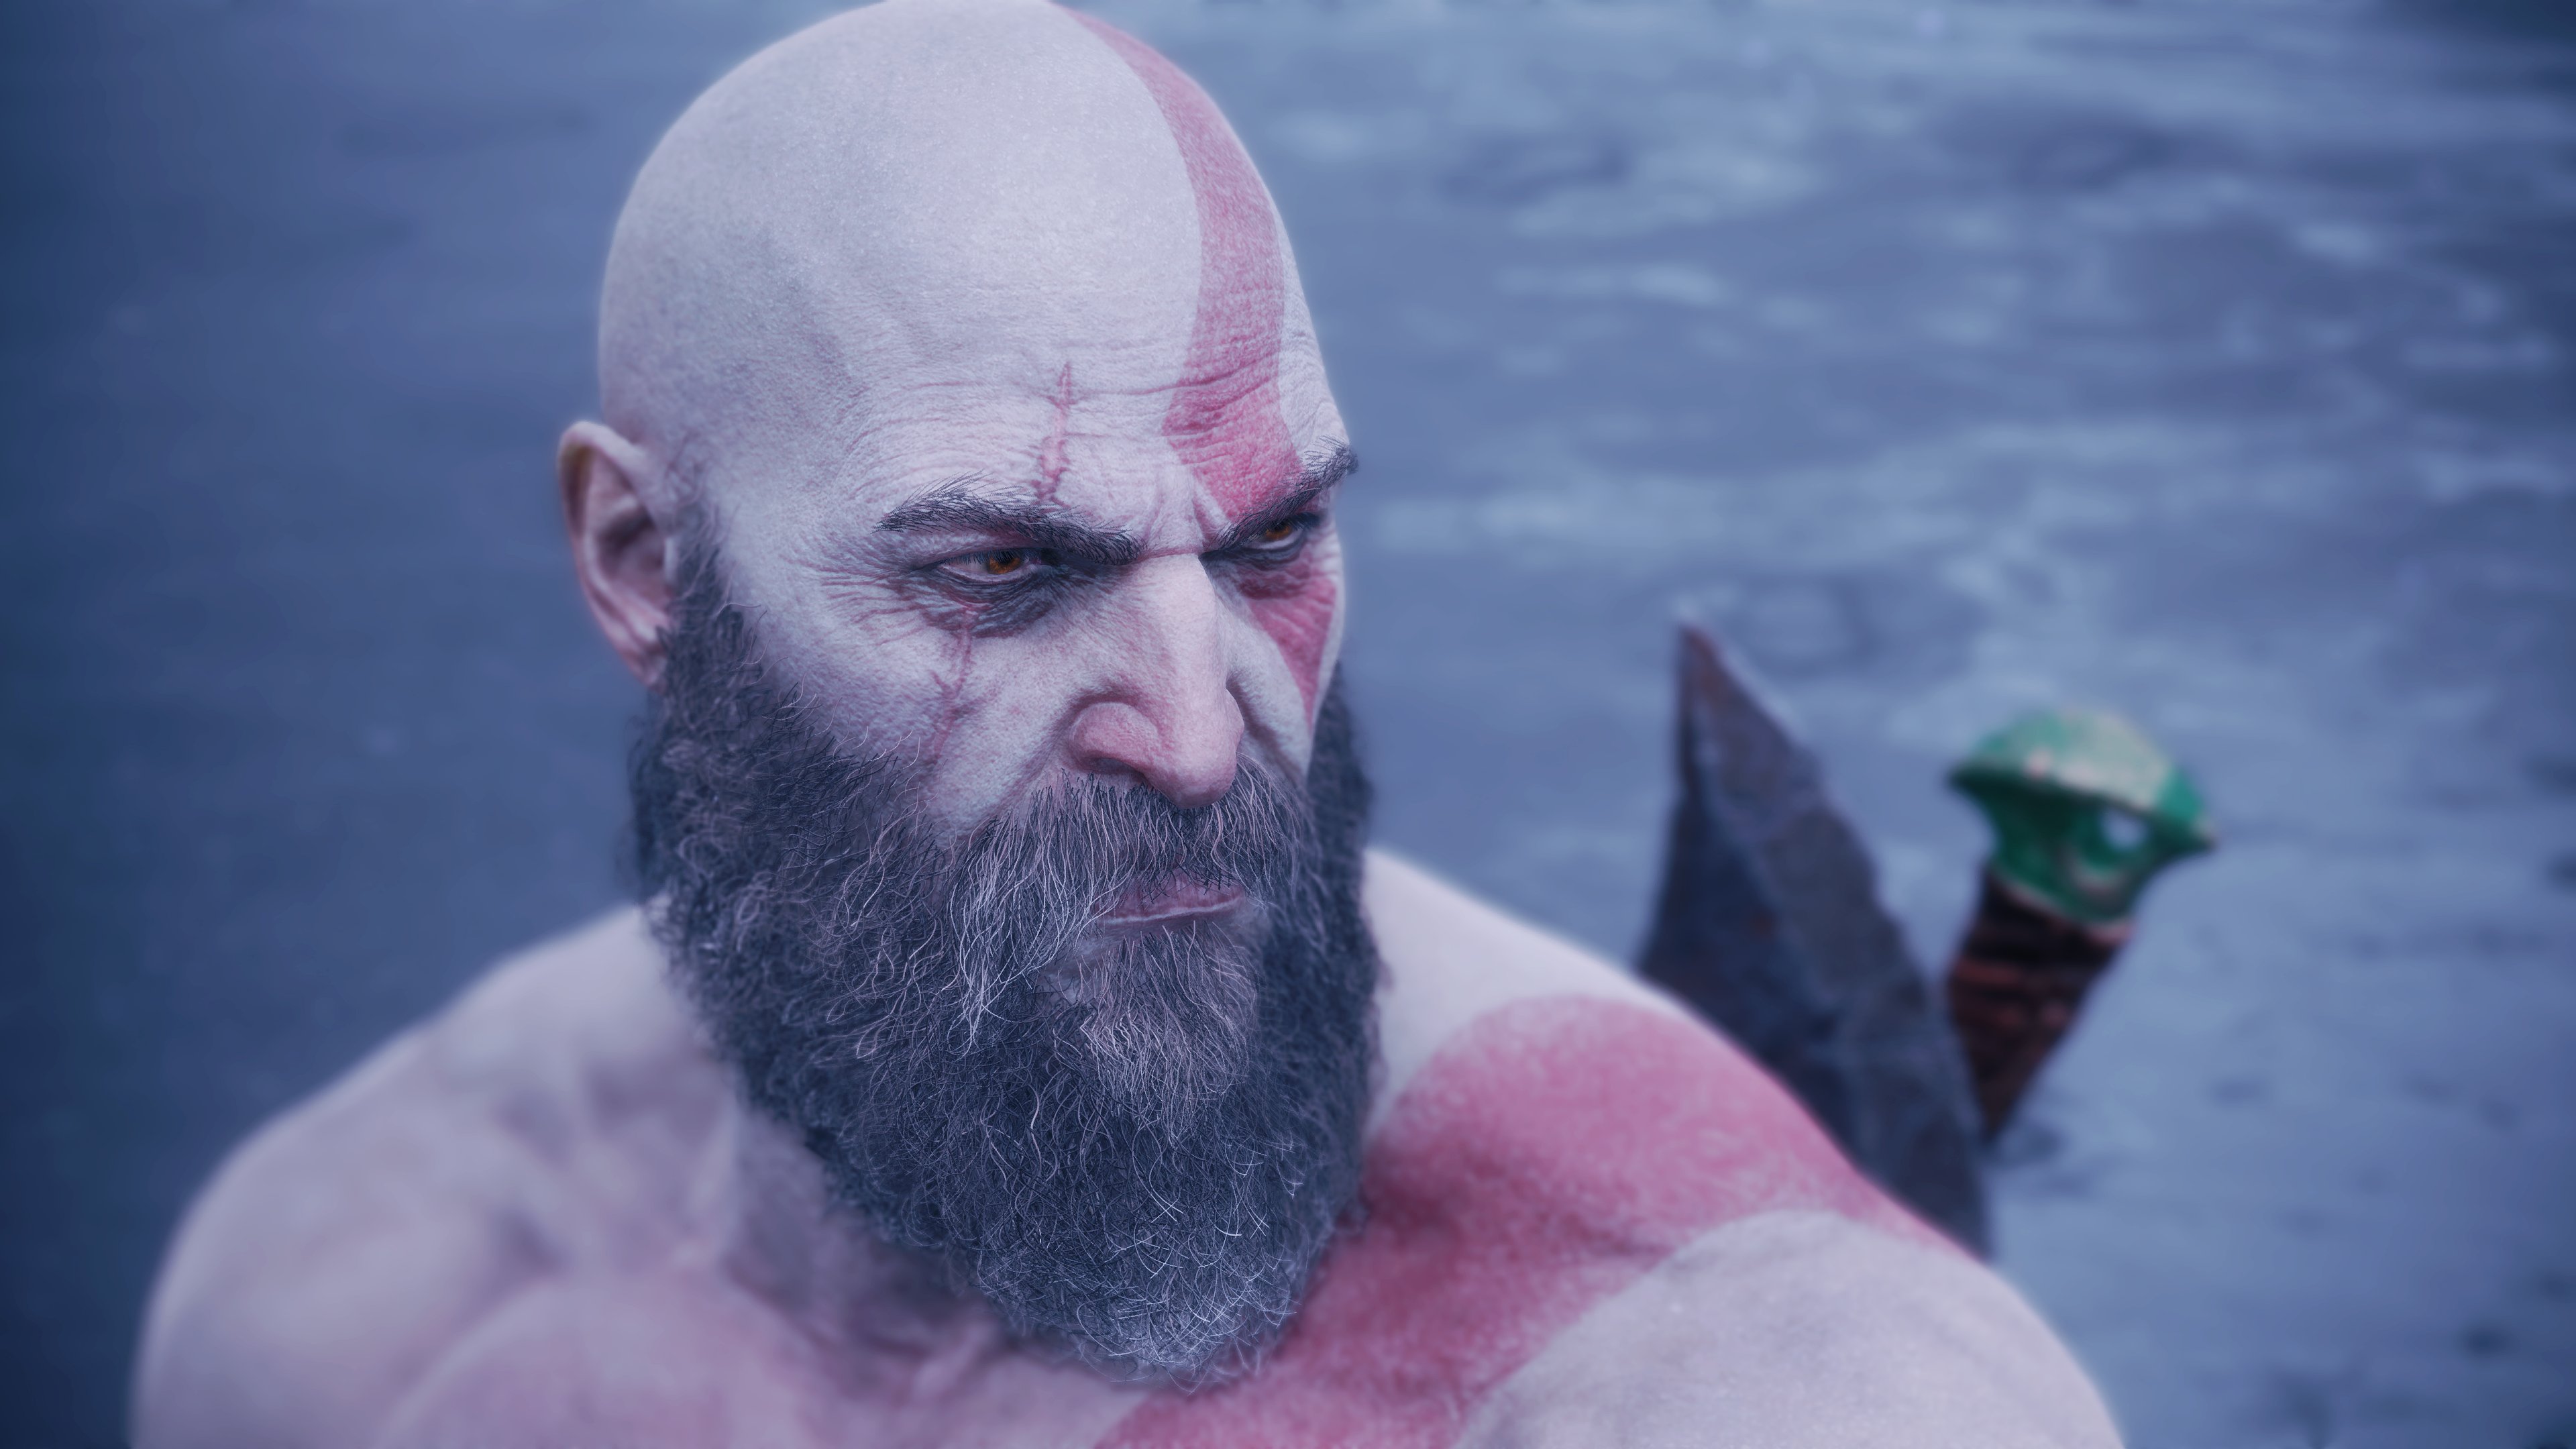 Santa Monica Studio – God of War Ragnarök on X: #GodOfWarRagnarok is on  sale! If you've been waiting for your chance to visit the Nine Realms, now  is the time to pick